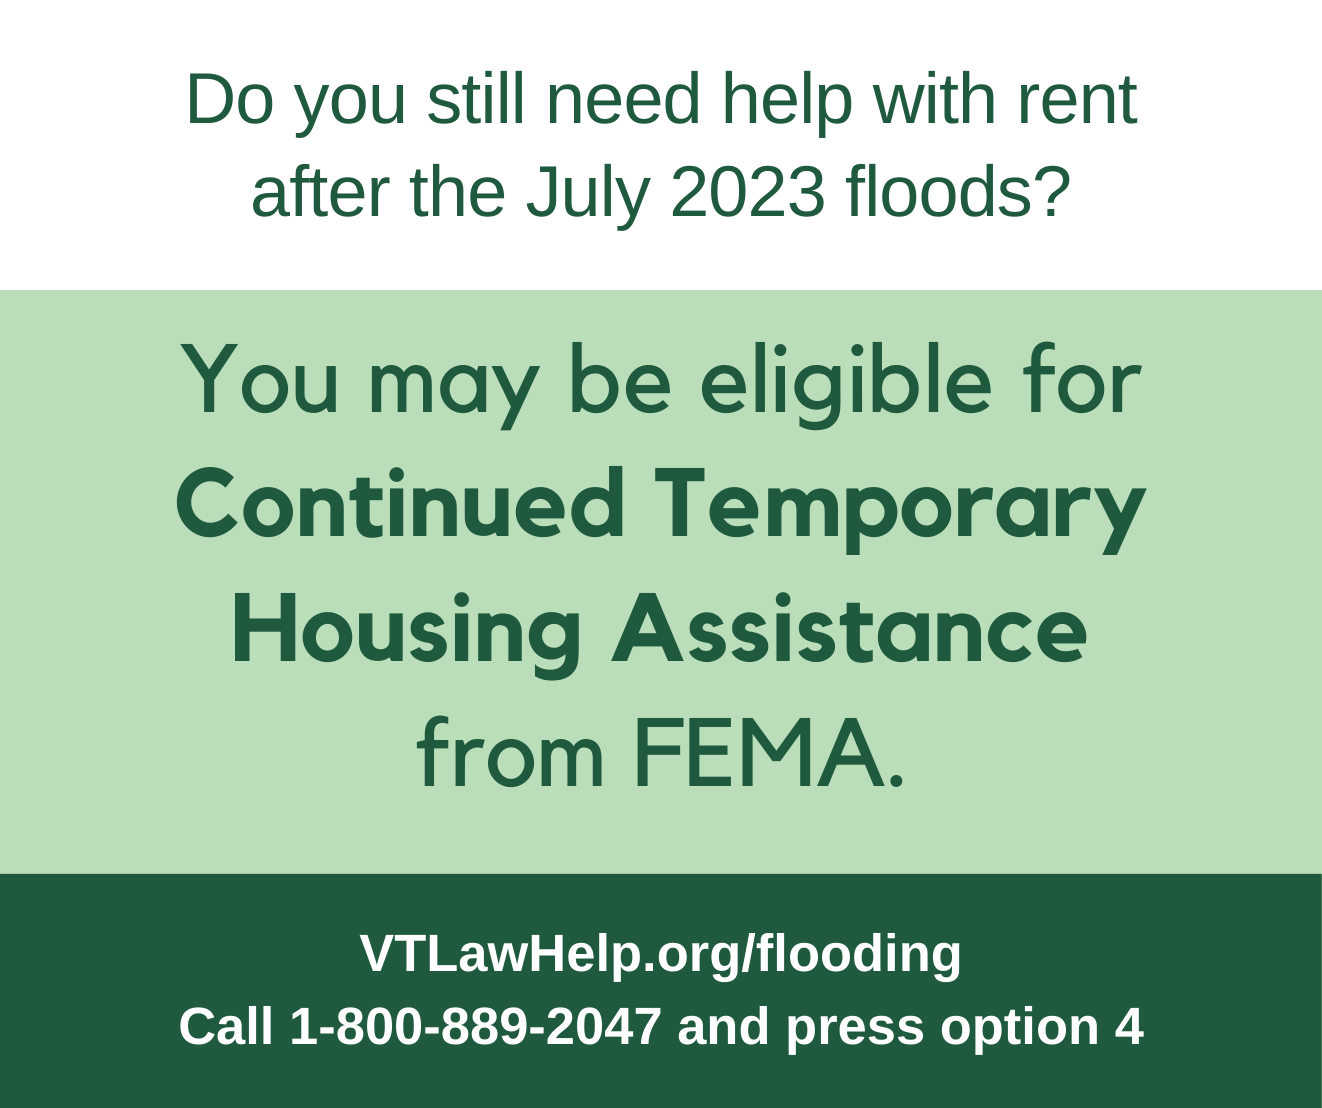 Do you still need help with rent after the July 2023 floods? Text description follows image